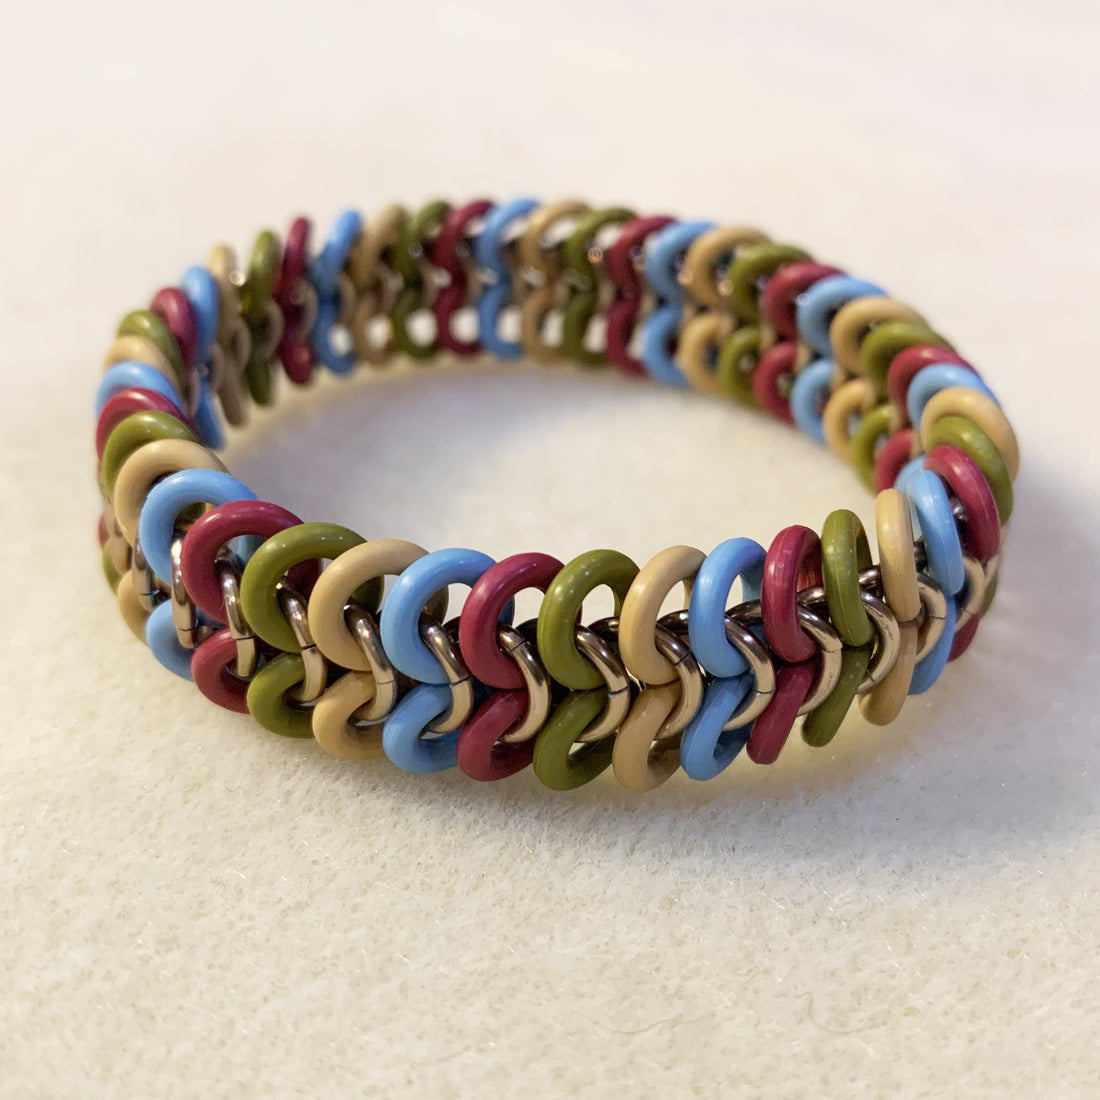 How to make a European 4 in 1 Stretch Bracelet